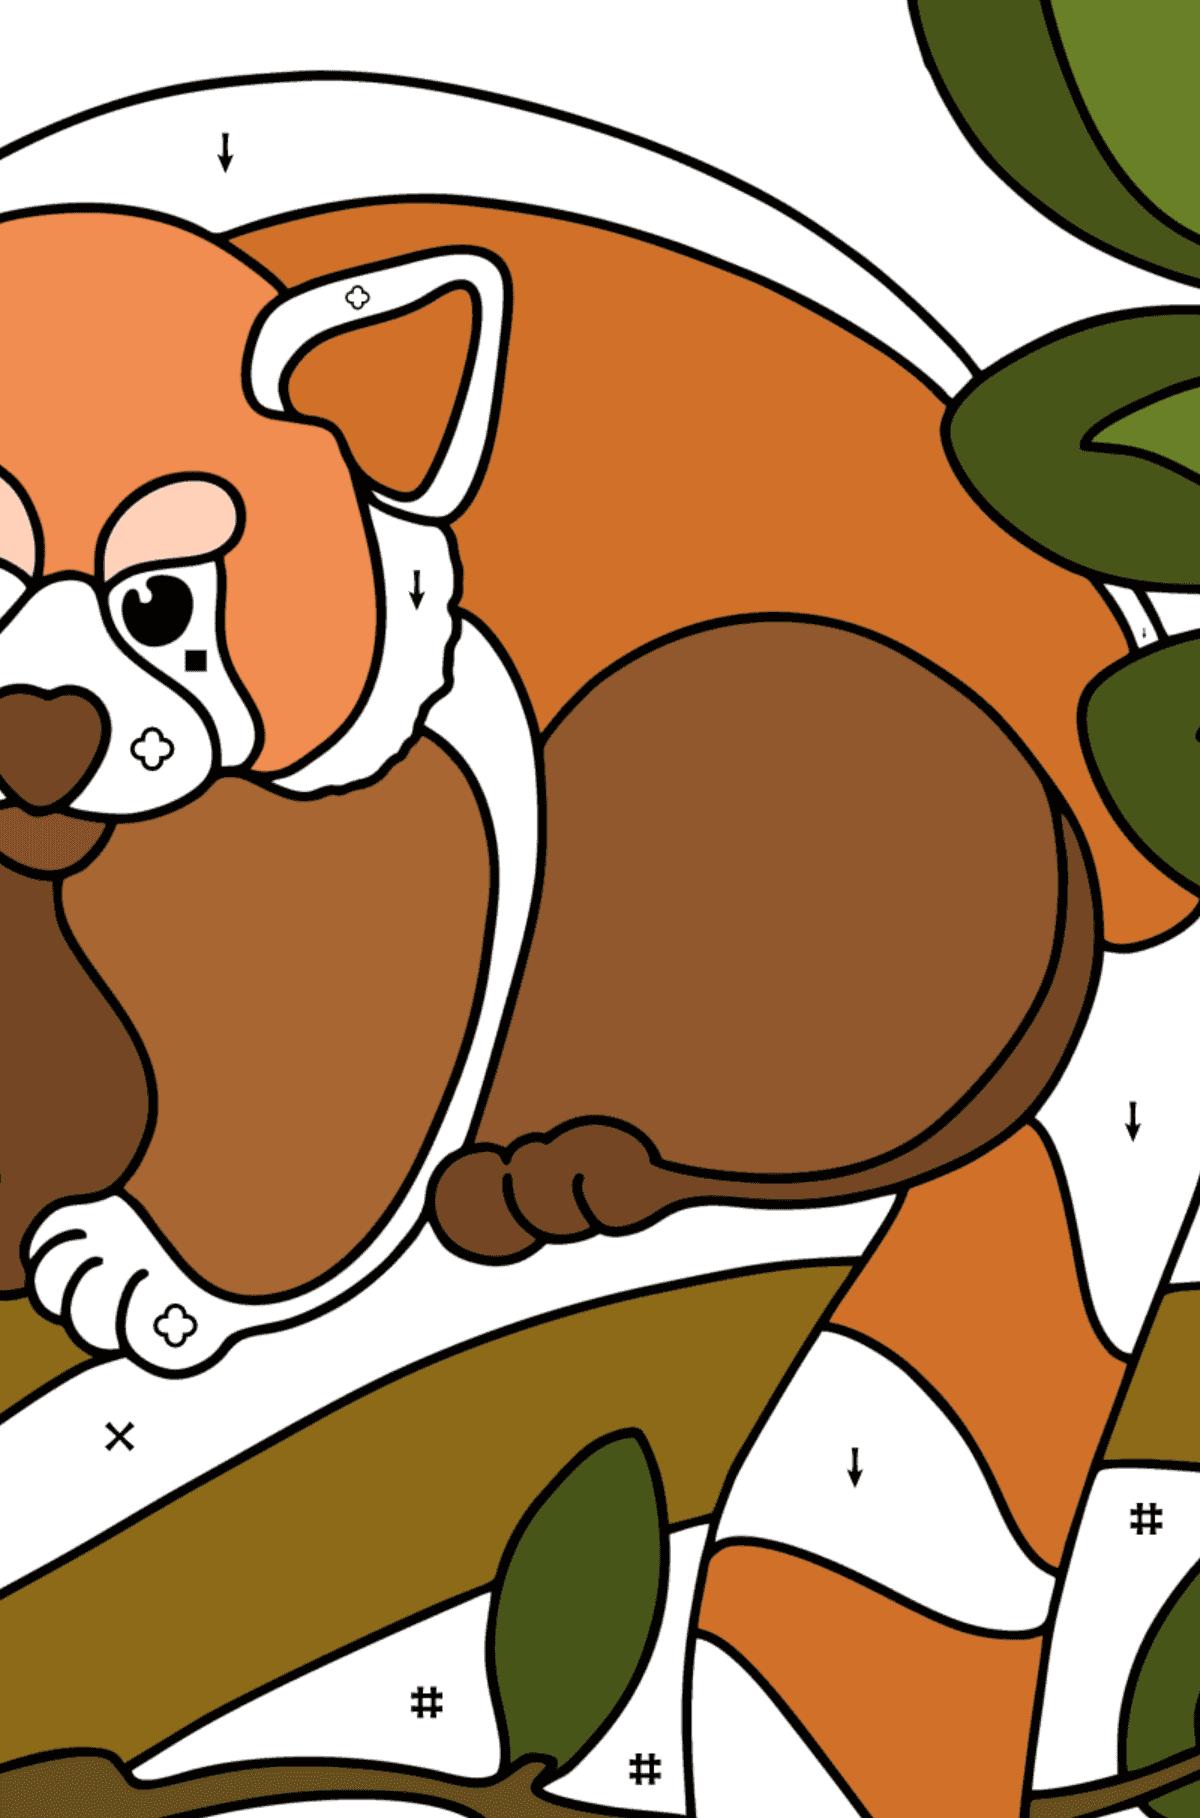 Red panda coloring page - Coloring by Symbols and Geometric Shapes for Kids